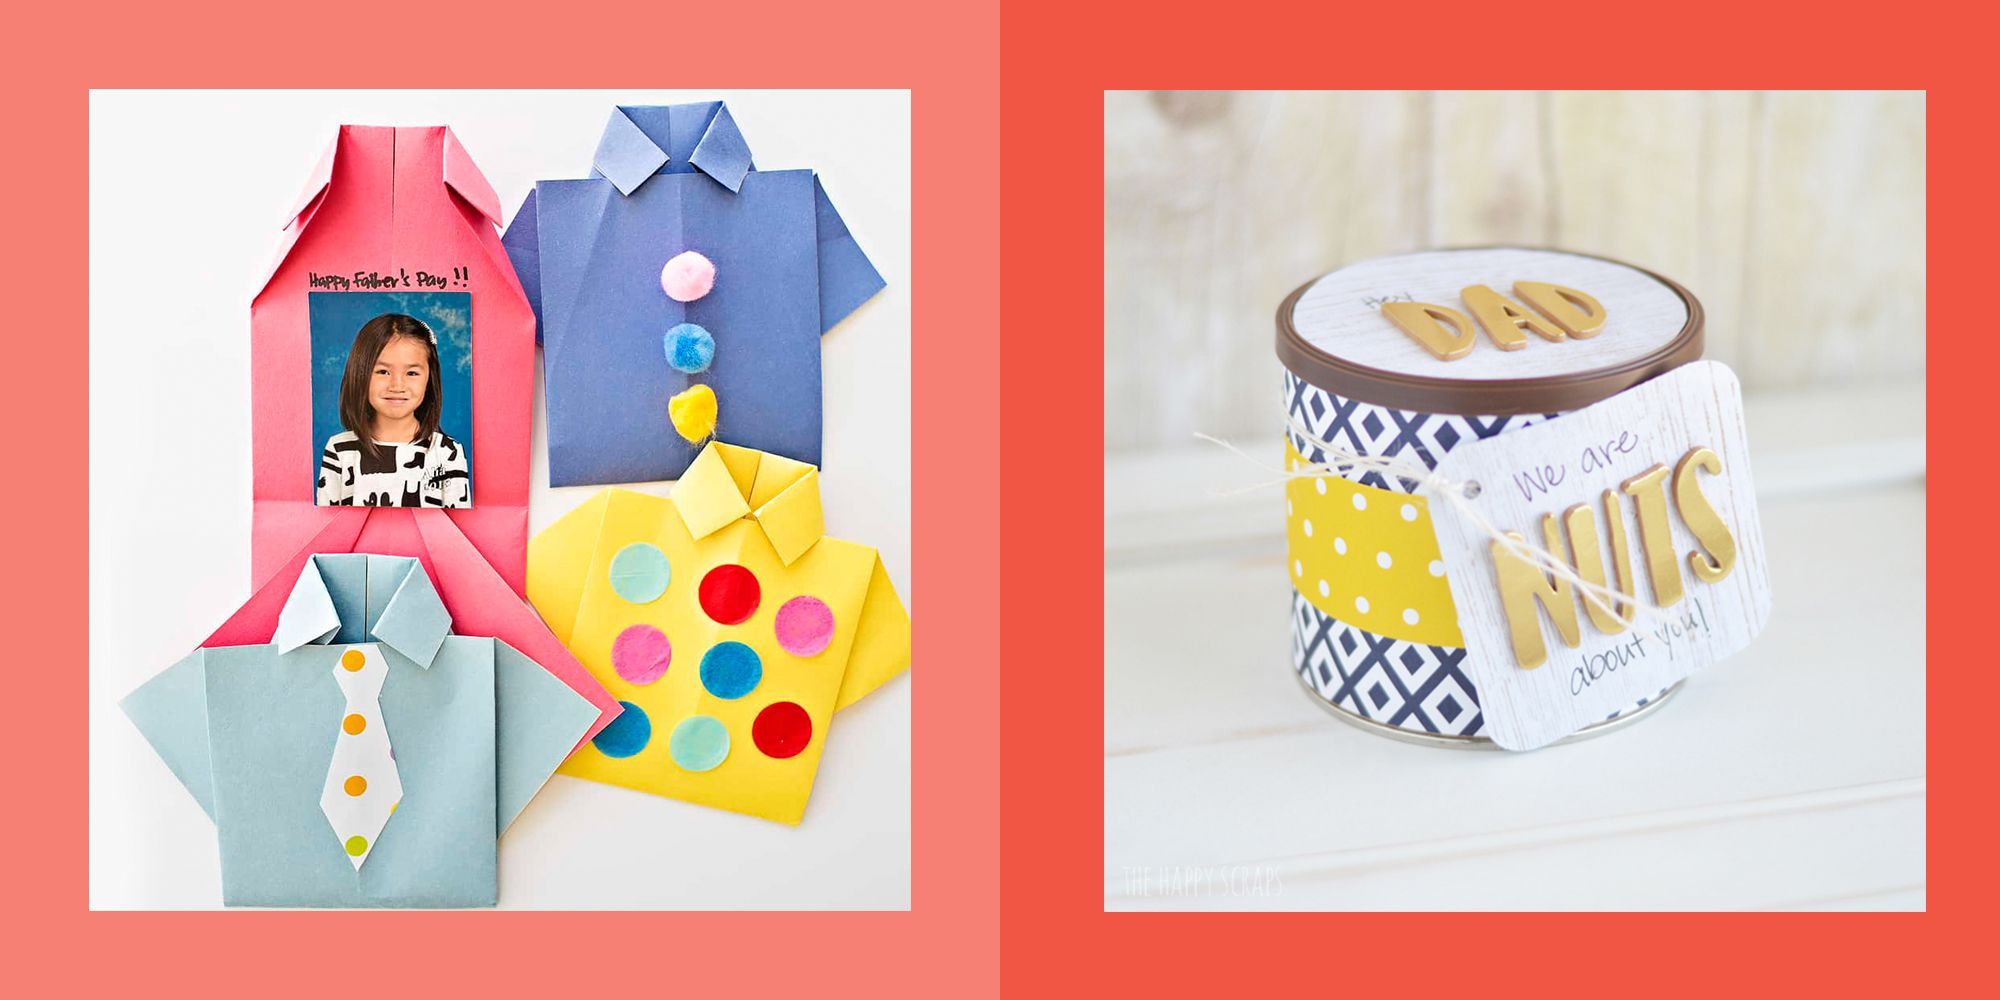 fathers day projects for toddlers